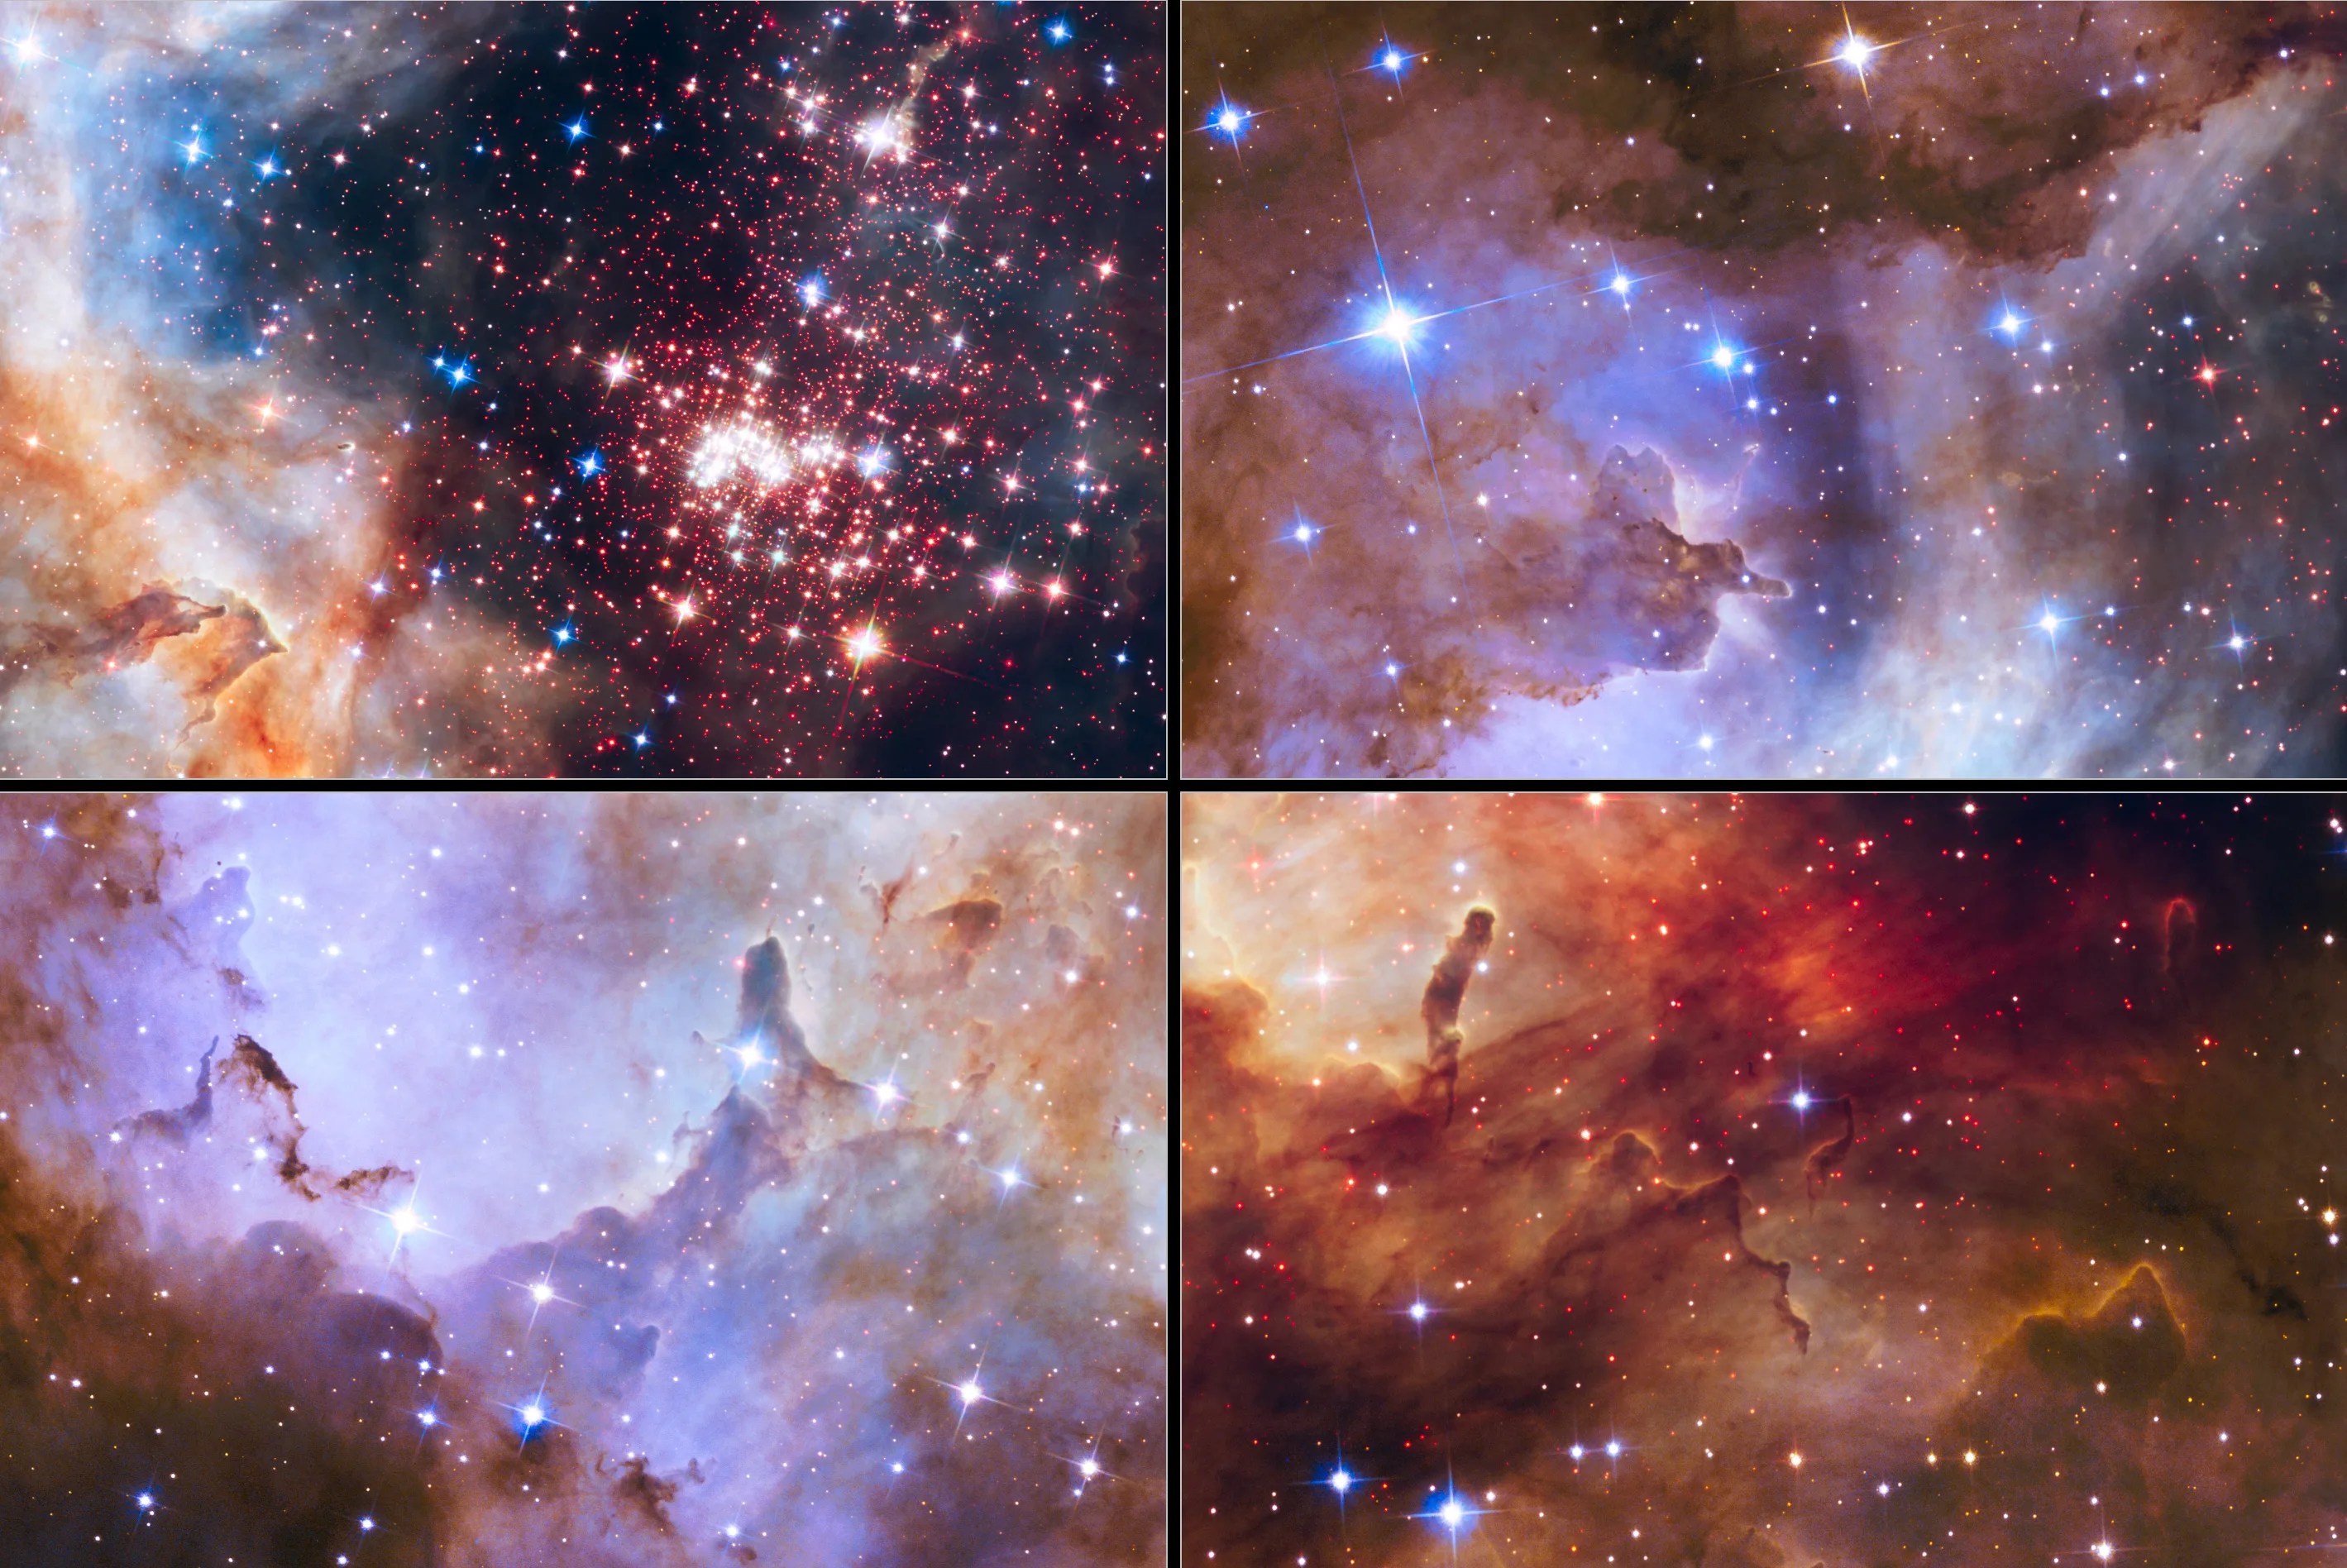 Tapestry of stars seen by Hubble